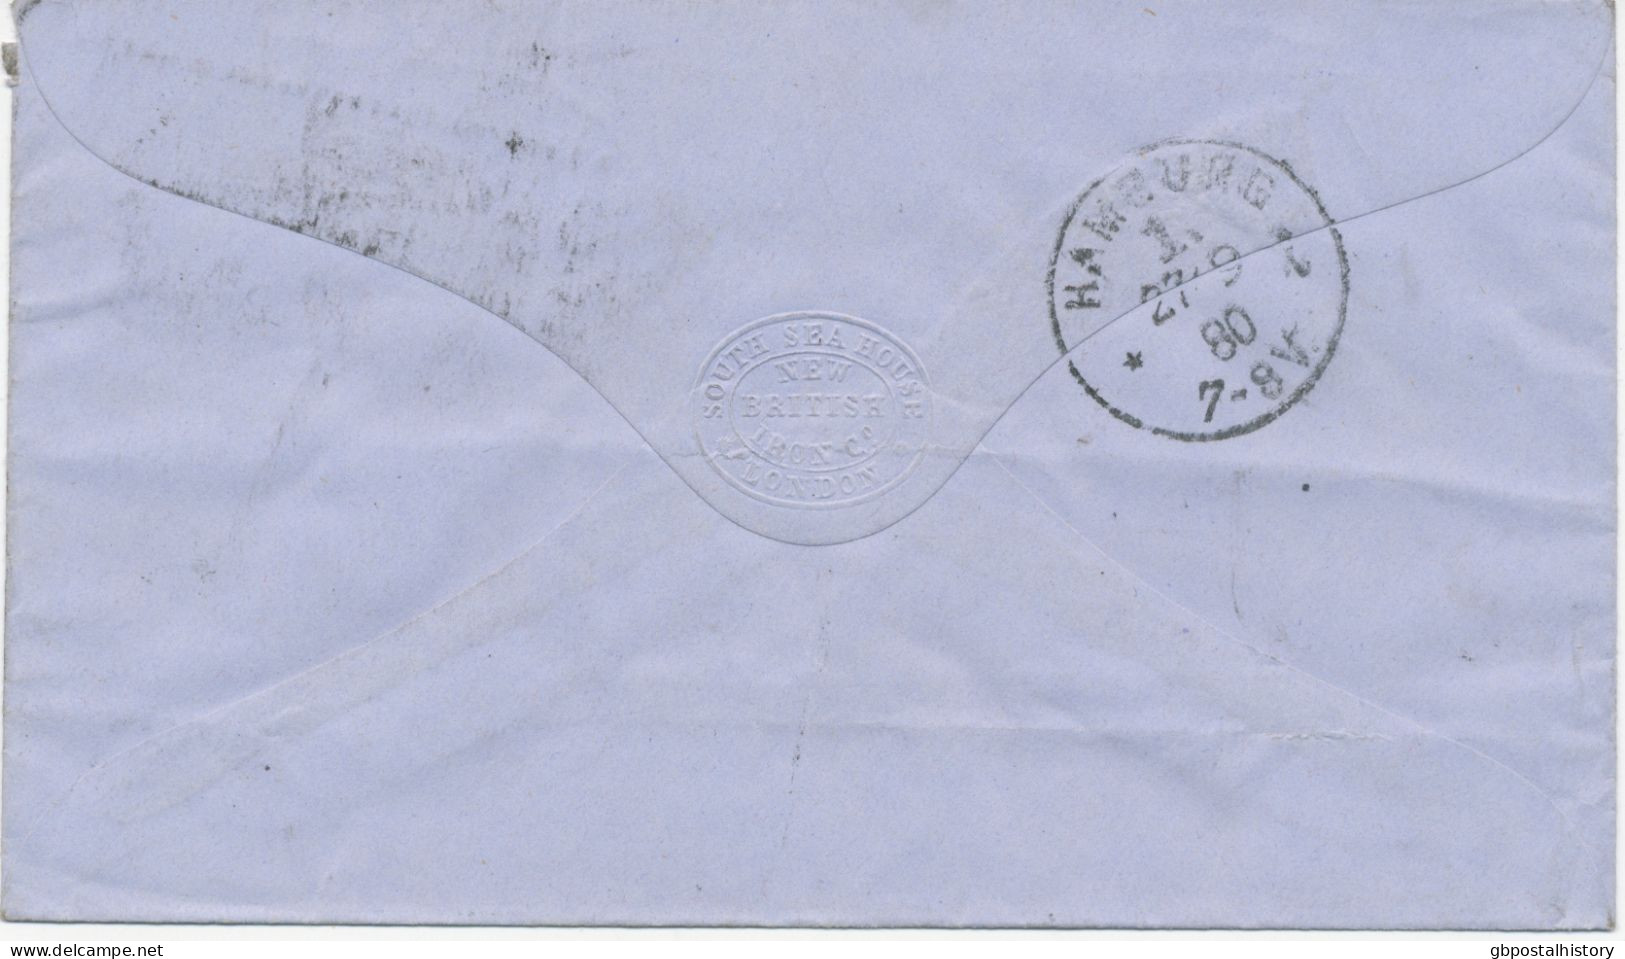 GB 1880, QV ½d Rose-red Pl.14 (TX) W. VARIETY: Imperforated At Right Side (EXTREMELY RARE ON COVER) Together With Two 1d - Storia Postale